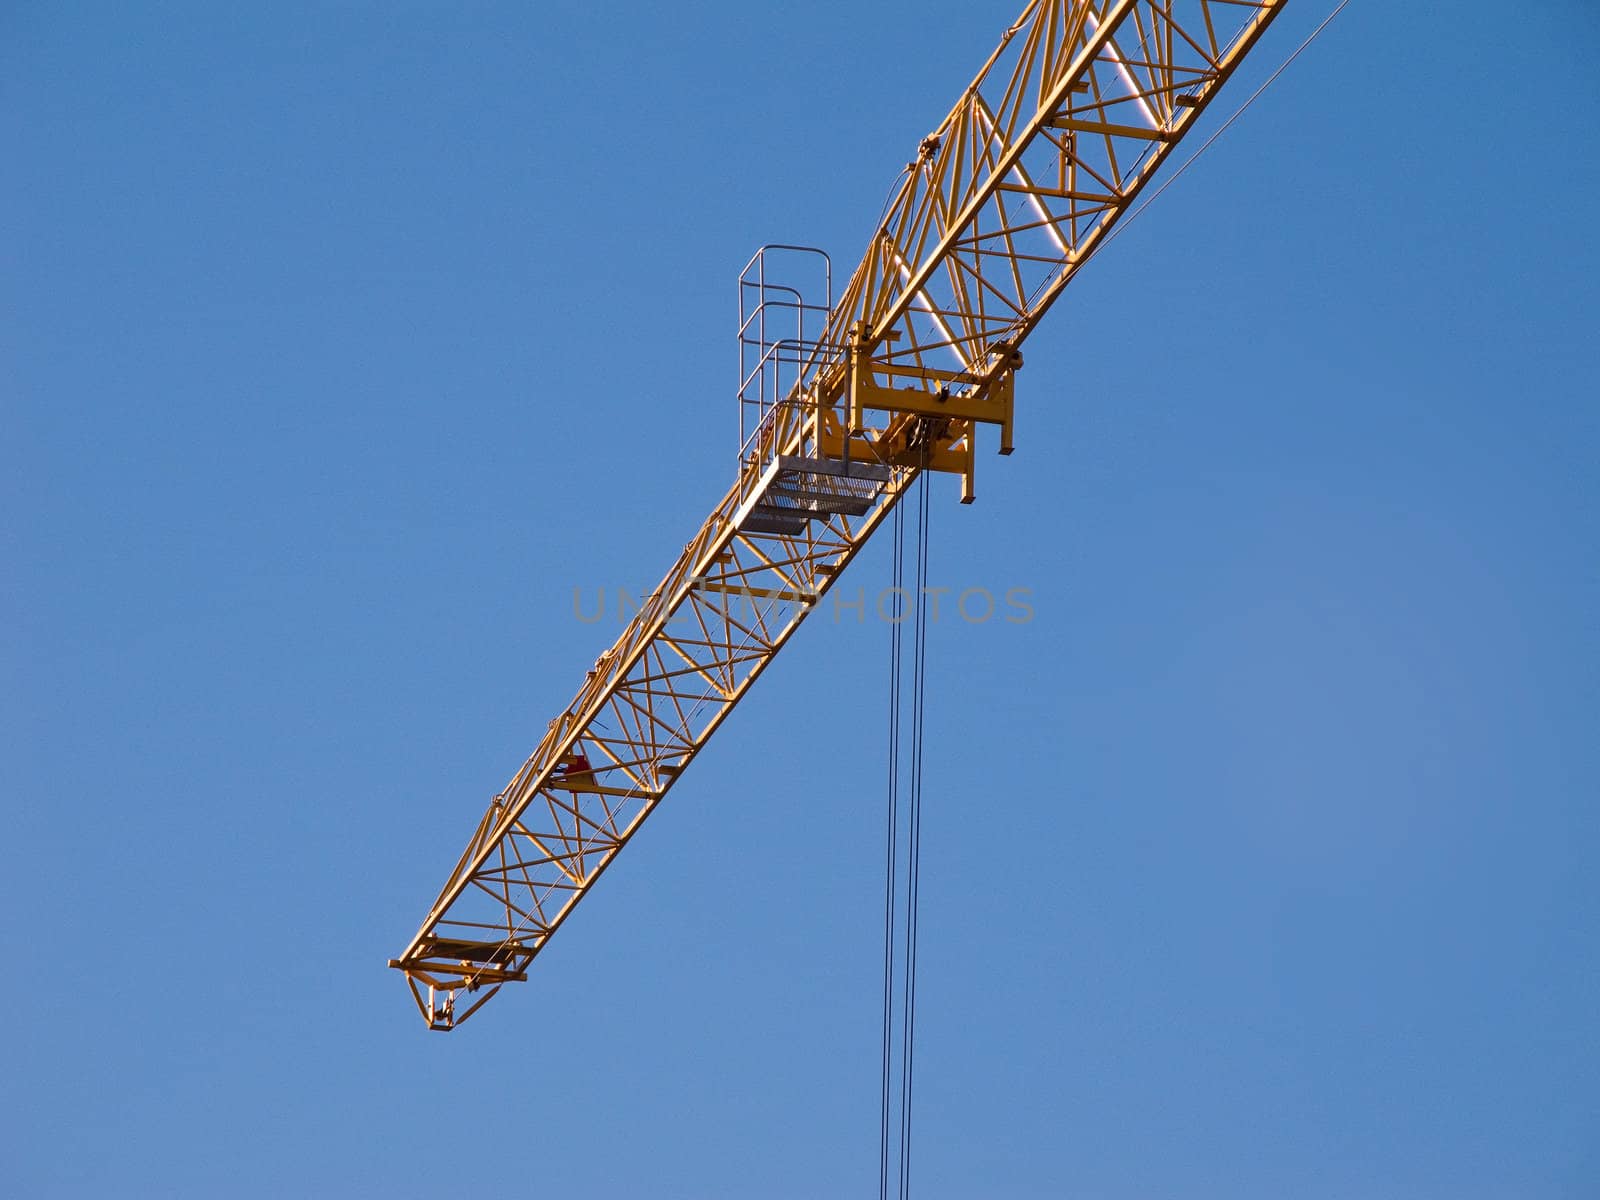 Detail of the jib of a yellow hoisting tower crane